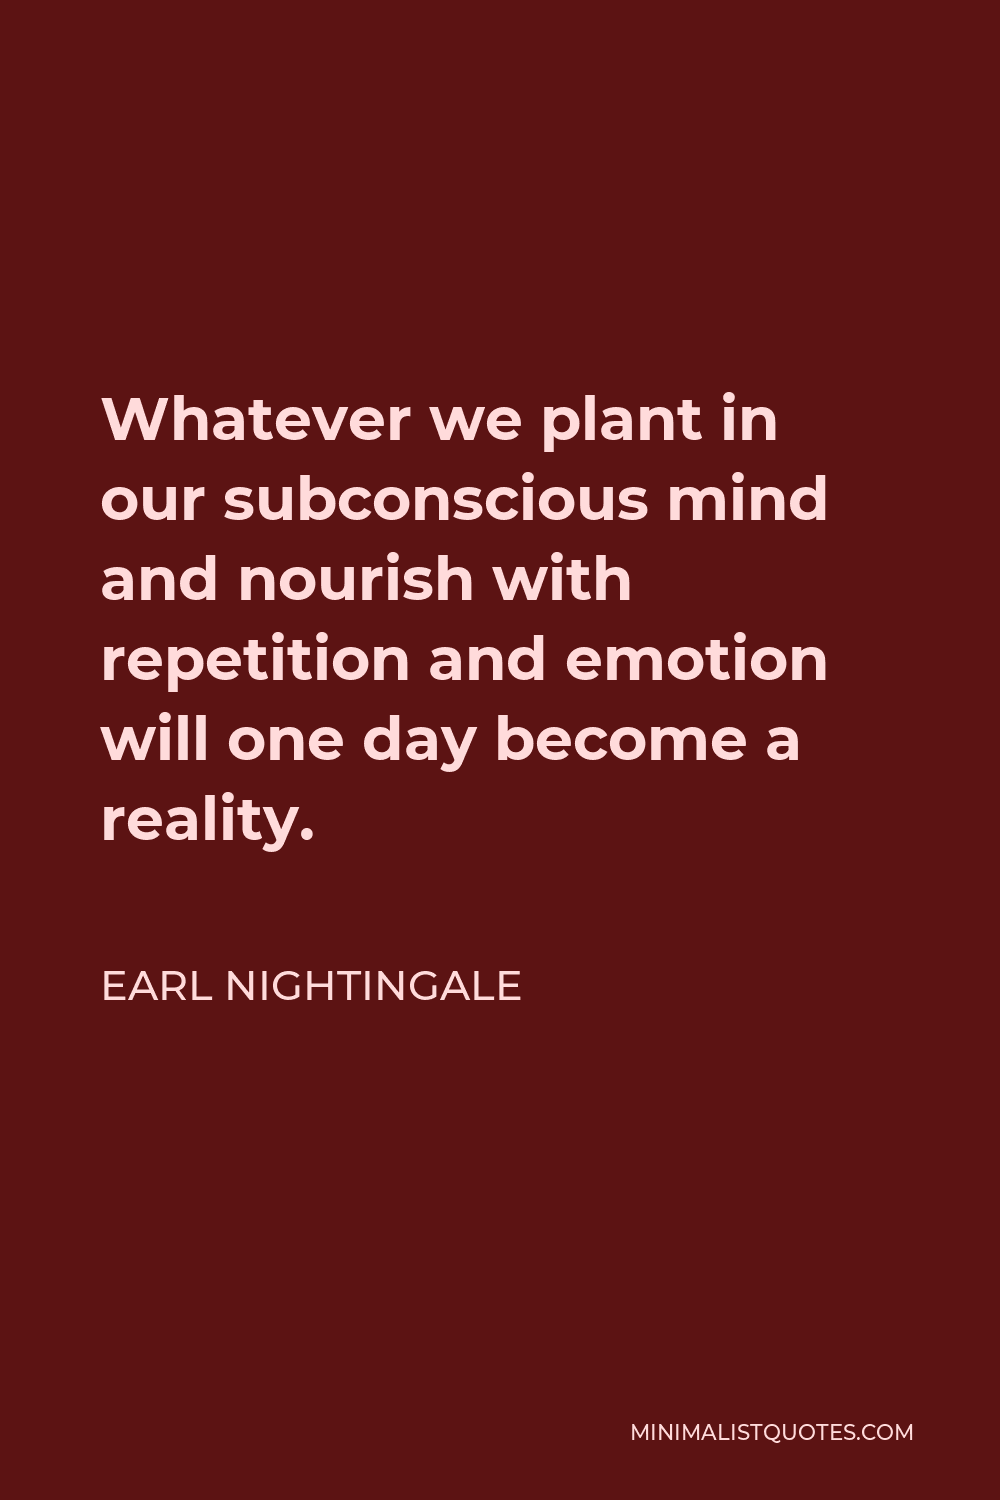 Earl Nightingale Quote - Whatever we plant in our subconscious mind and nourish with repetition and emotion will one day become a reality.